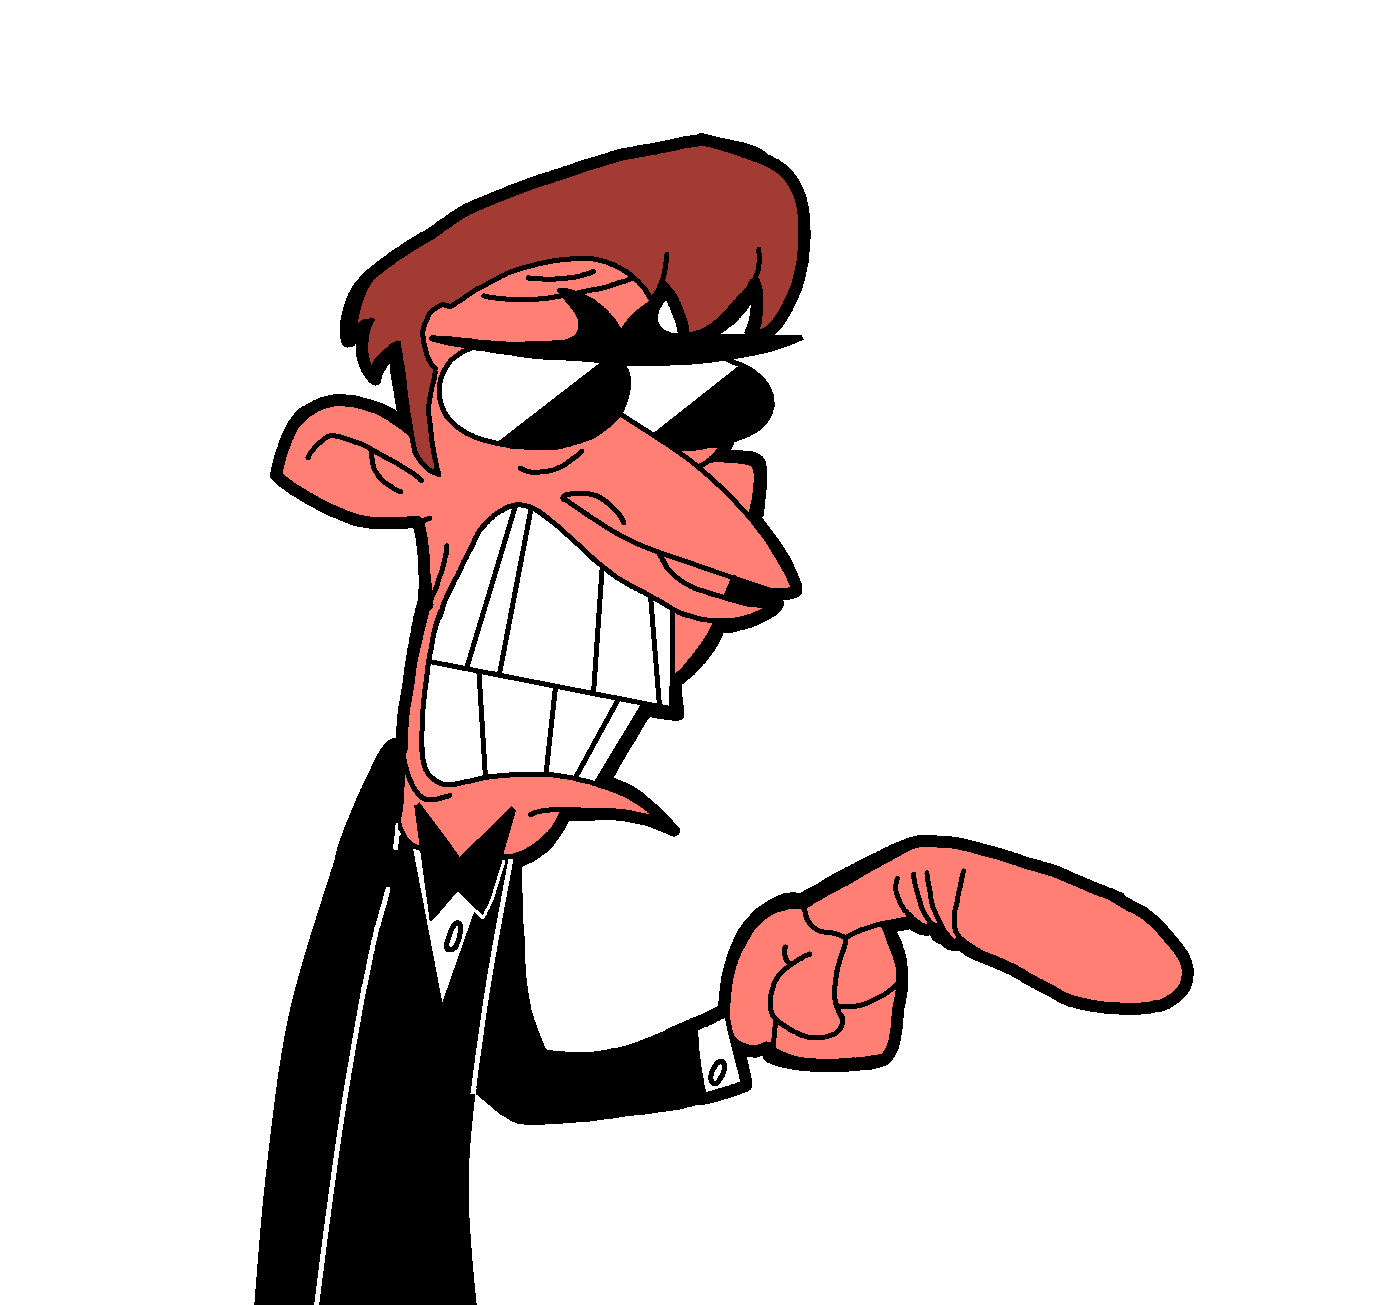 Man cartoon image group. Yelling clipart angry speech